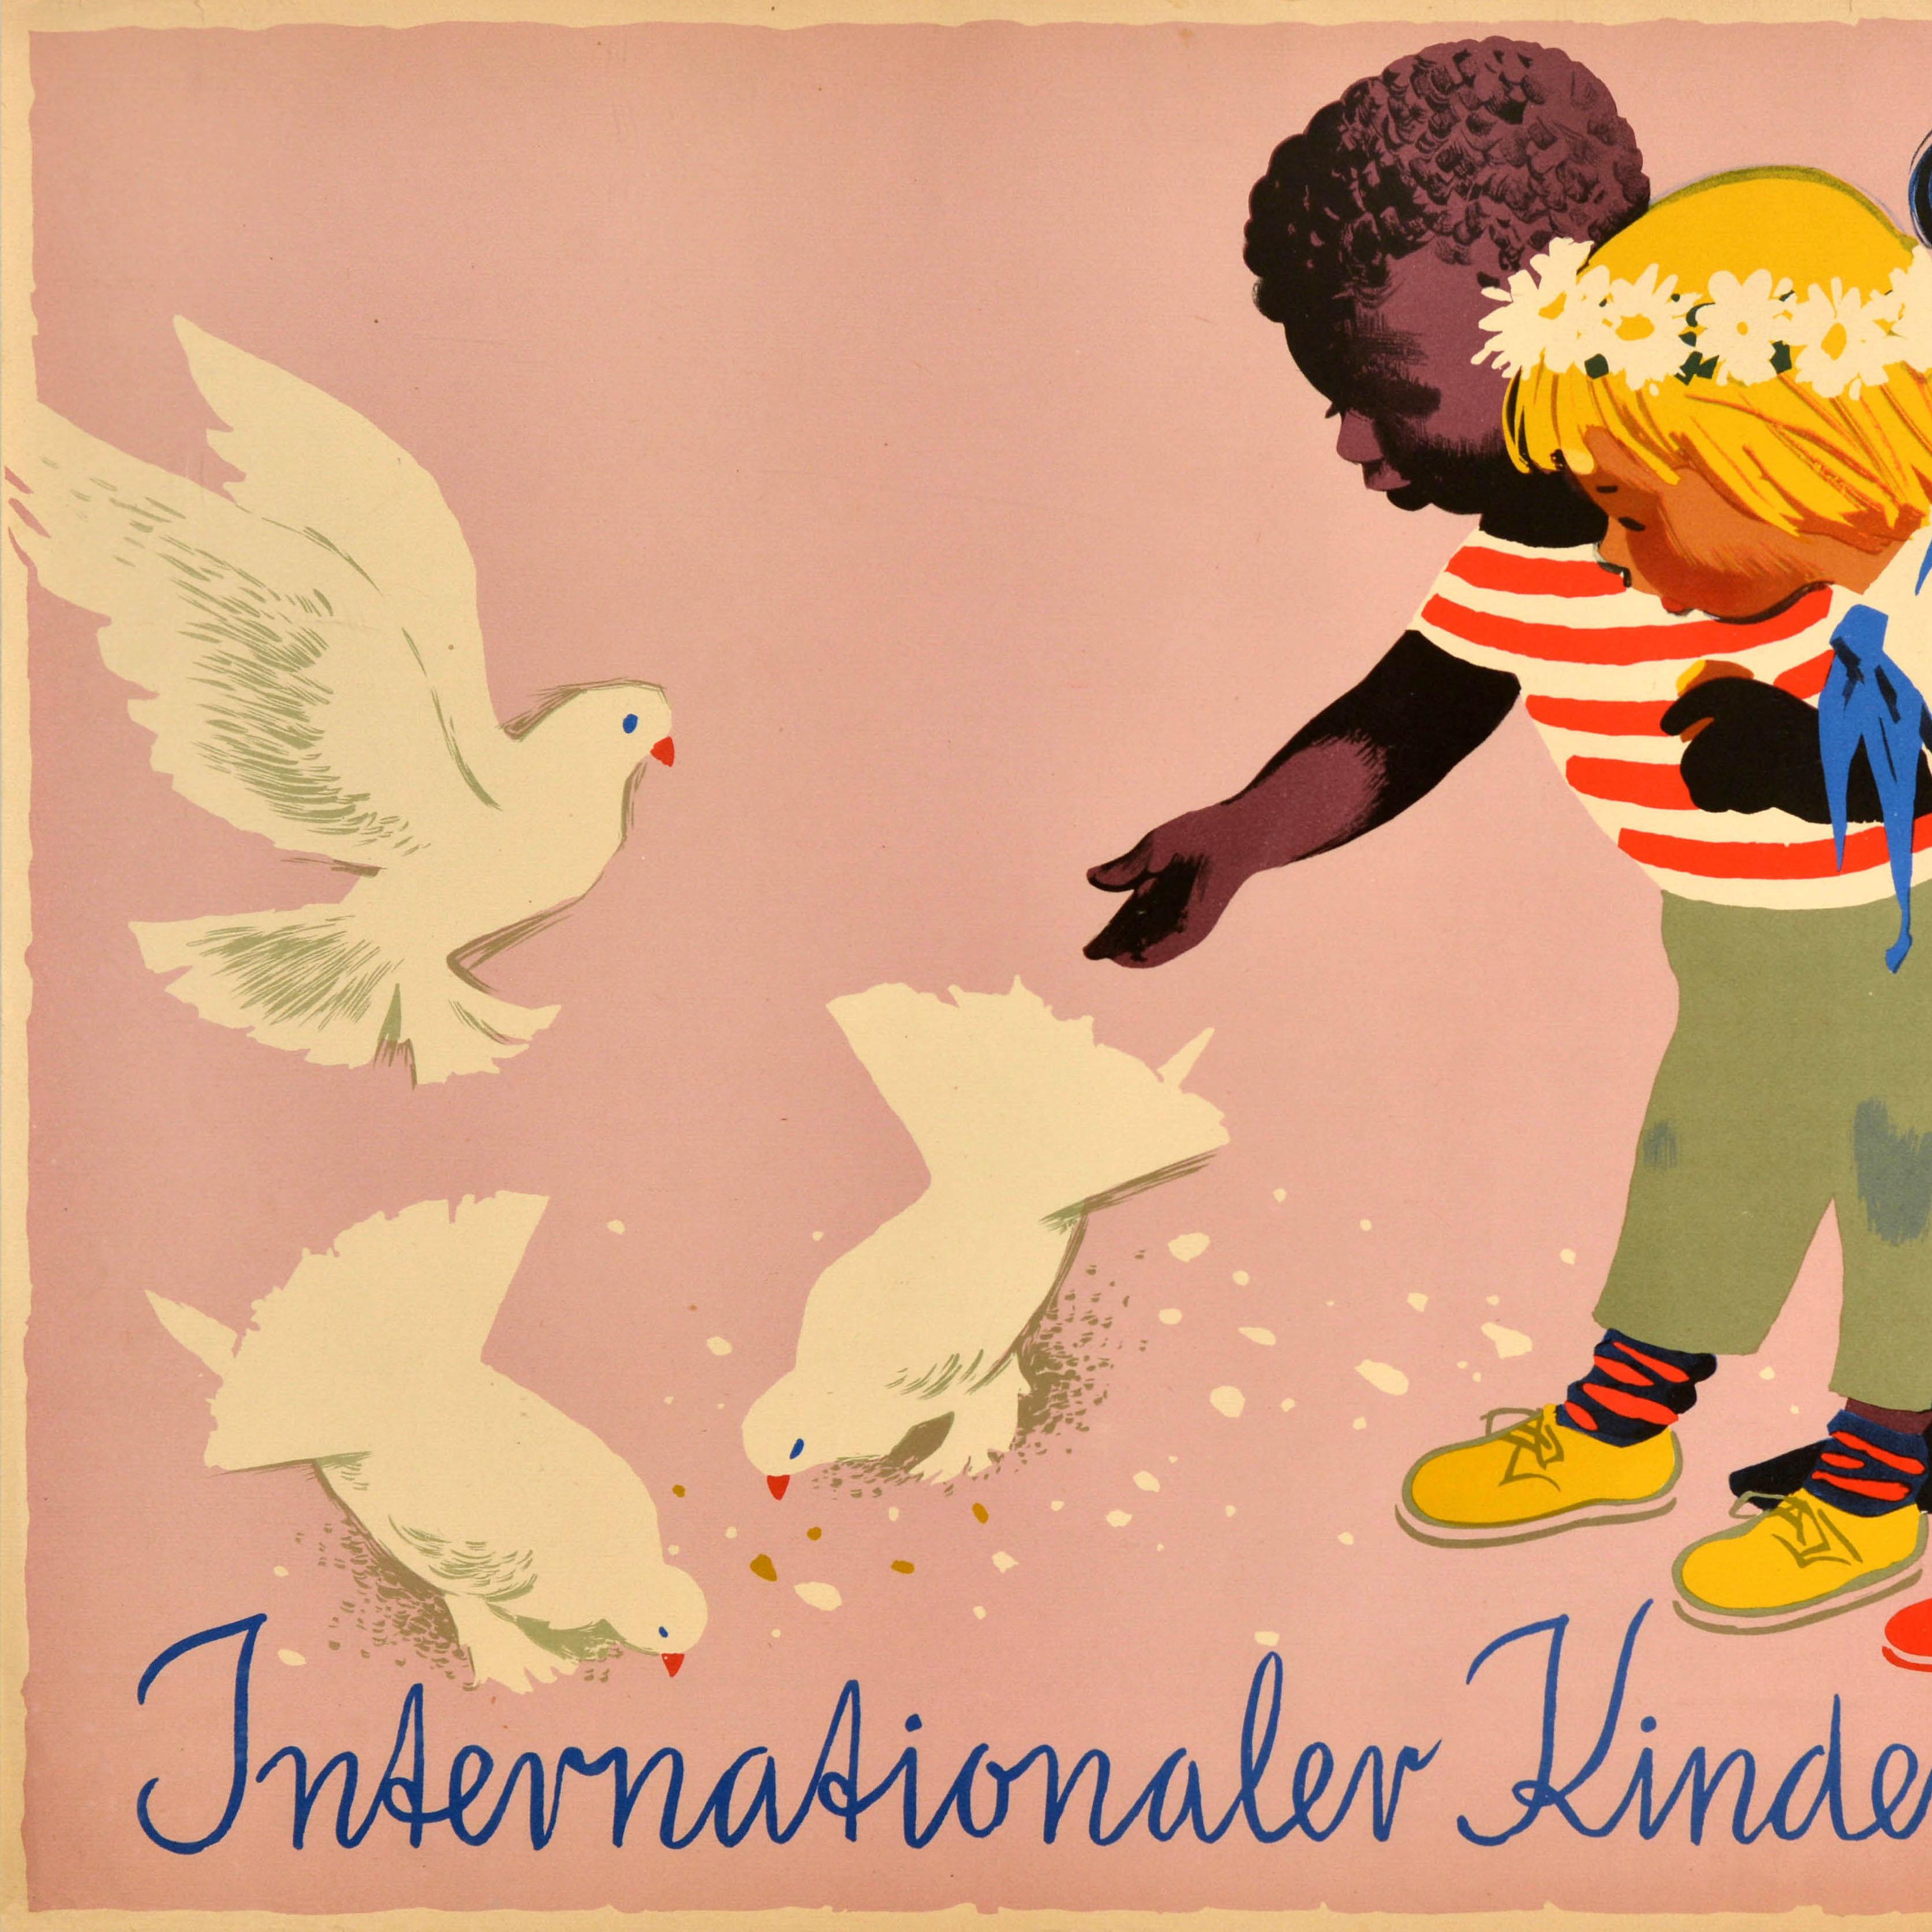 Original vintage poster for International Children's Day / Internationaler Kindertag 1959 featuring an illustration of three children from different nations feeding three white doves representing peace and watching them, one girl wearing a daisy